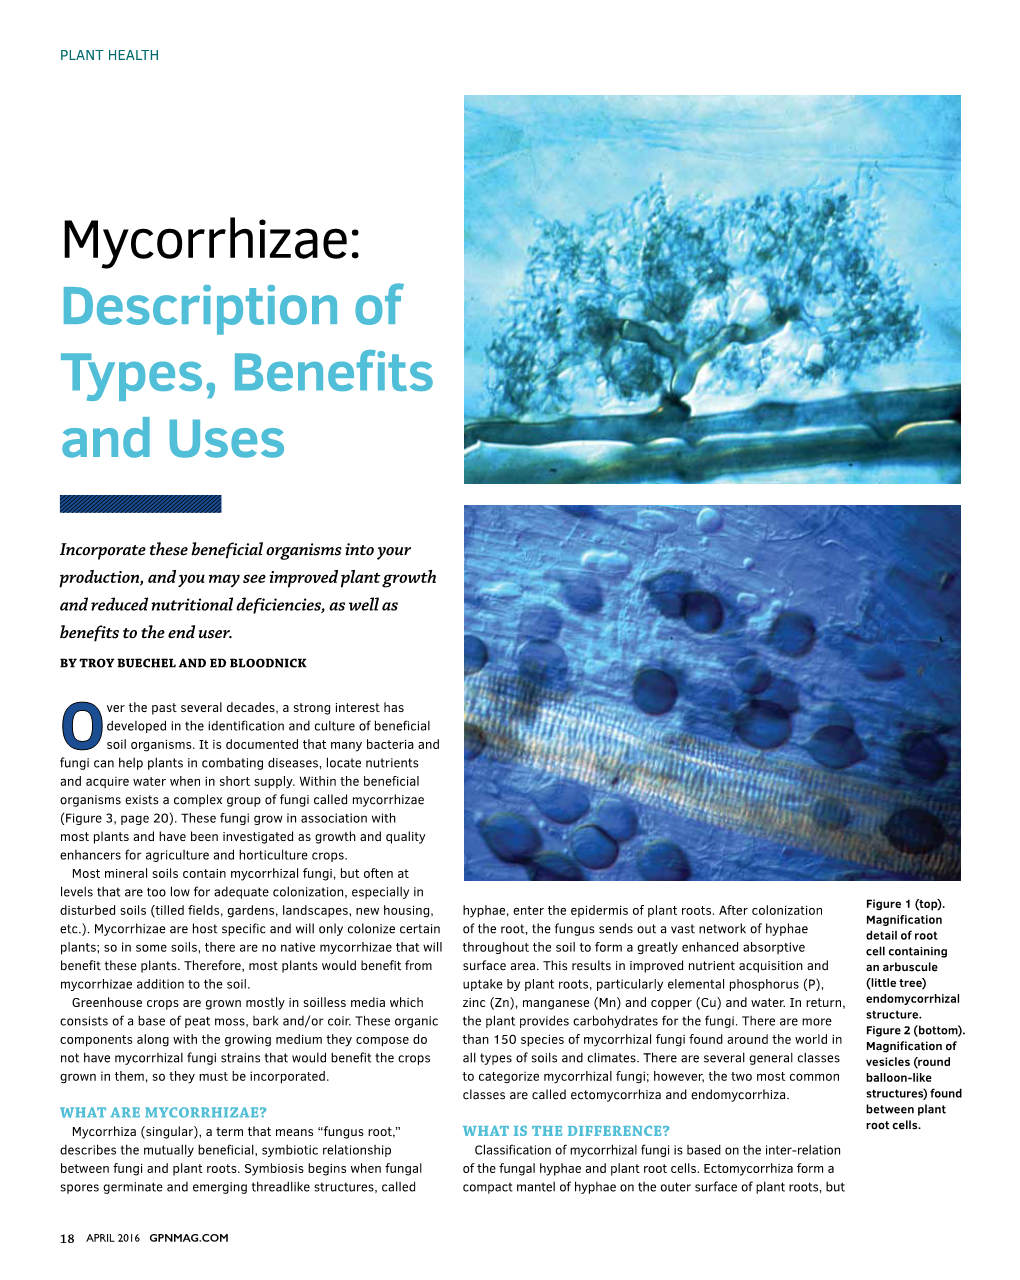 Mycorrhizae: Description of Types, Benefits and Uses